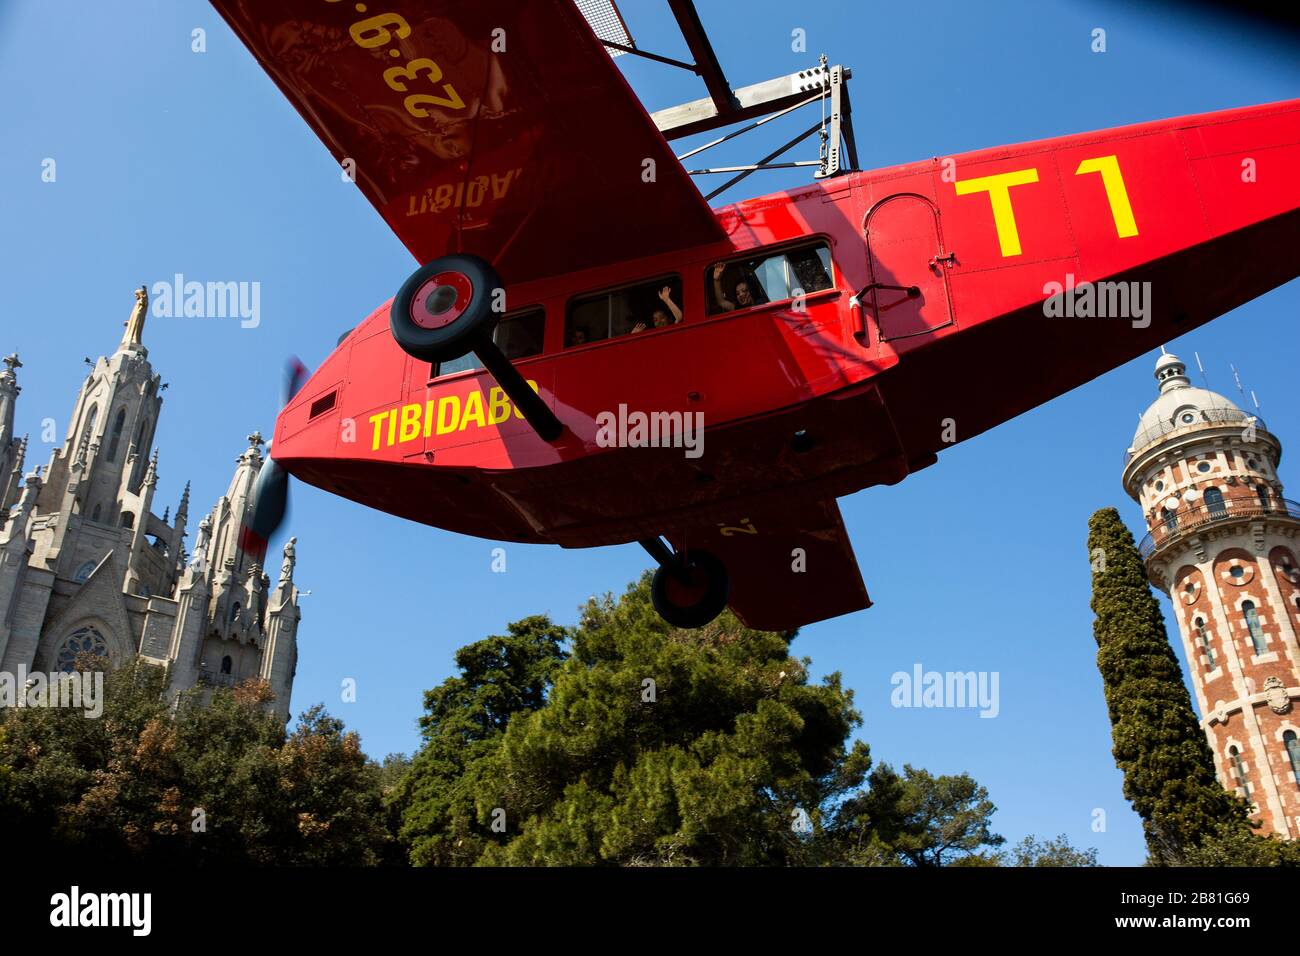 El Avió. Airplane carousel, a replica of the first aircraft to fly from Barcelona to Madrid in 1927, at the Tibidabo amusement park, Barcelona, Catalo Stock Photo